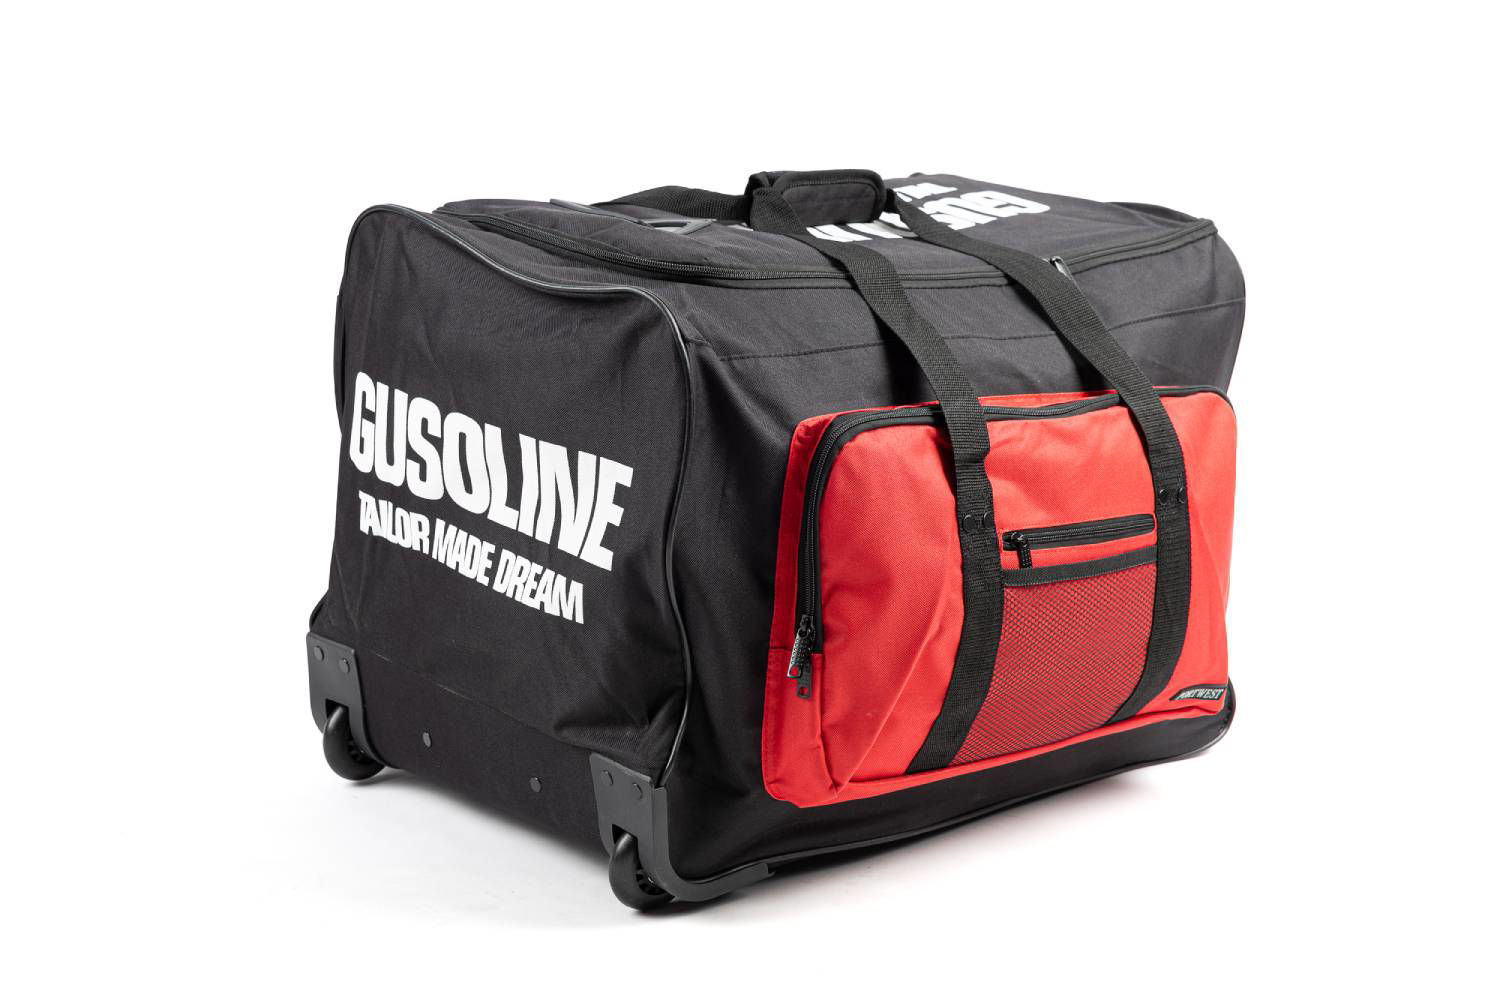 Picture of Gusoline Trolley Bag Black